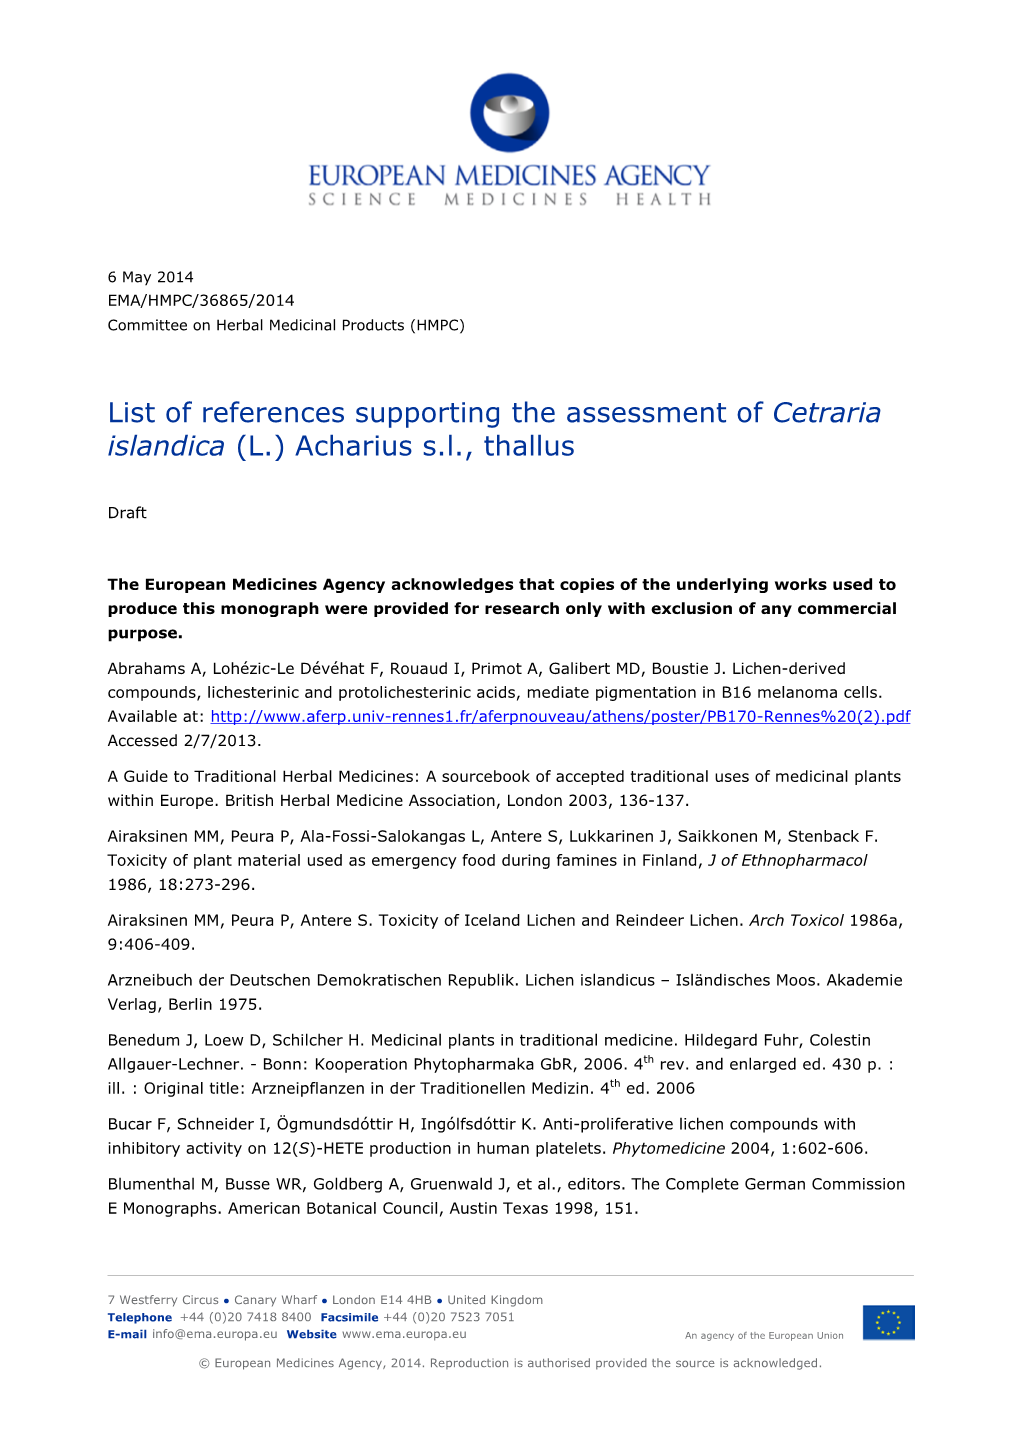 List of References Supporting the Assessment of Cetraria Islandica (L.) Acharius S.L., Thallus